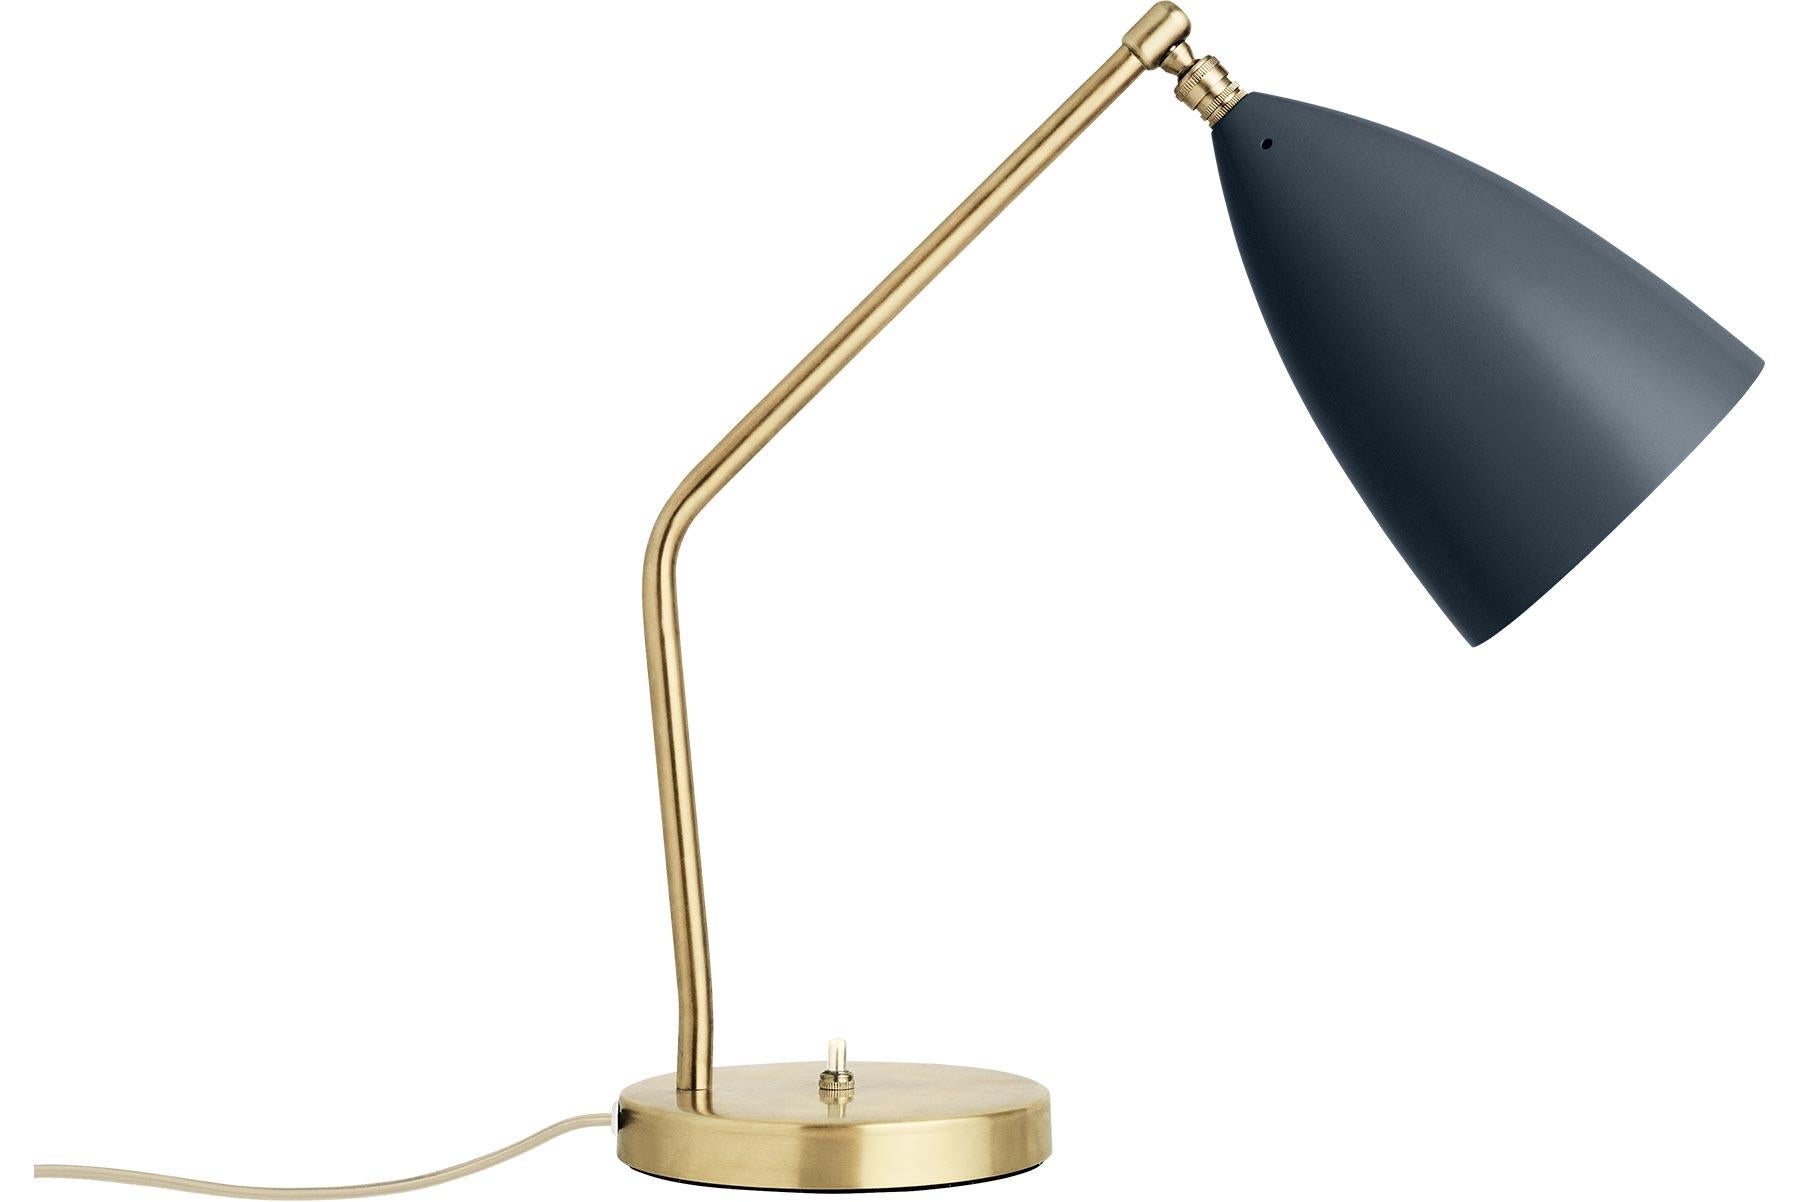 Greta M. Grossman designed the iconic Gräshoppa table lamp in 1947 and with its sophisticated yet playful design, it is still as relevant today. The distinctive, elongated conical shade is beautifully combined with a tubular brass stand, a great